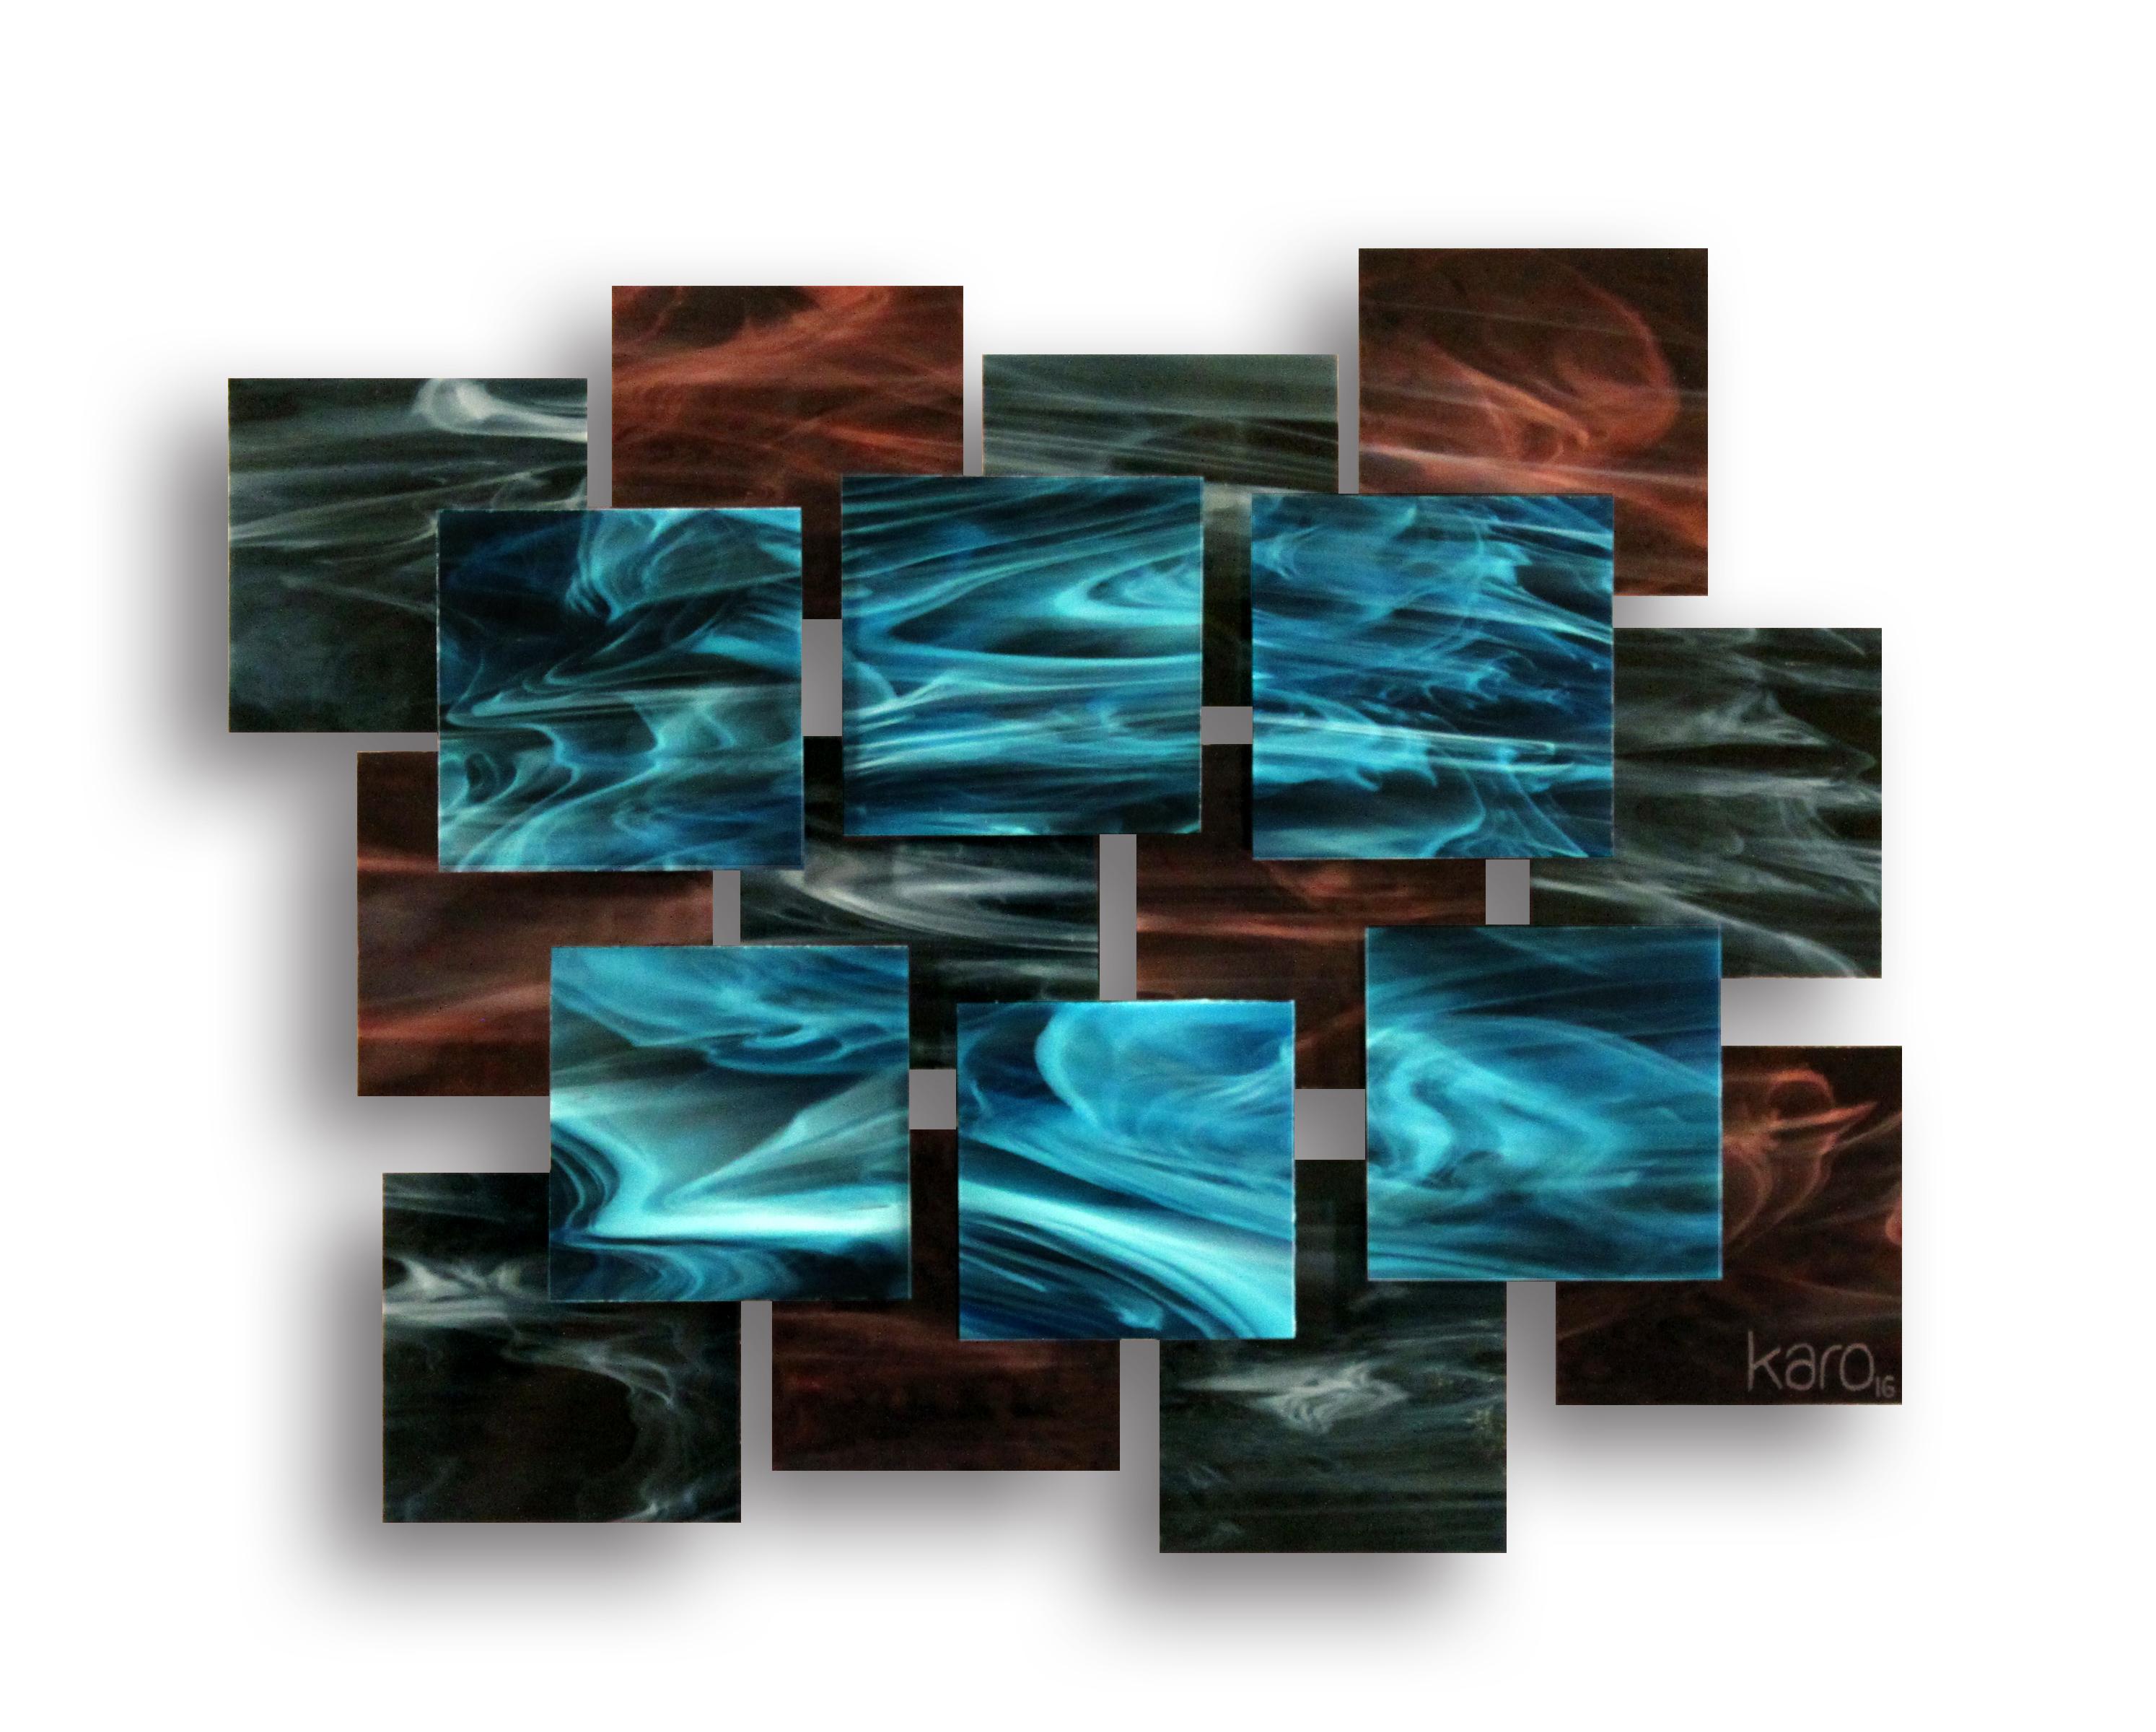 Electric, Abstract 3D Original Glass and Metal Wall Sculpture, One of a Kind